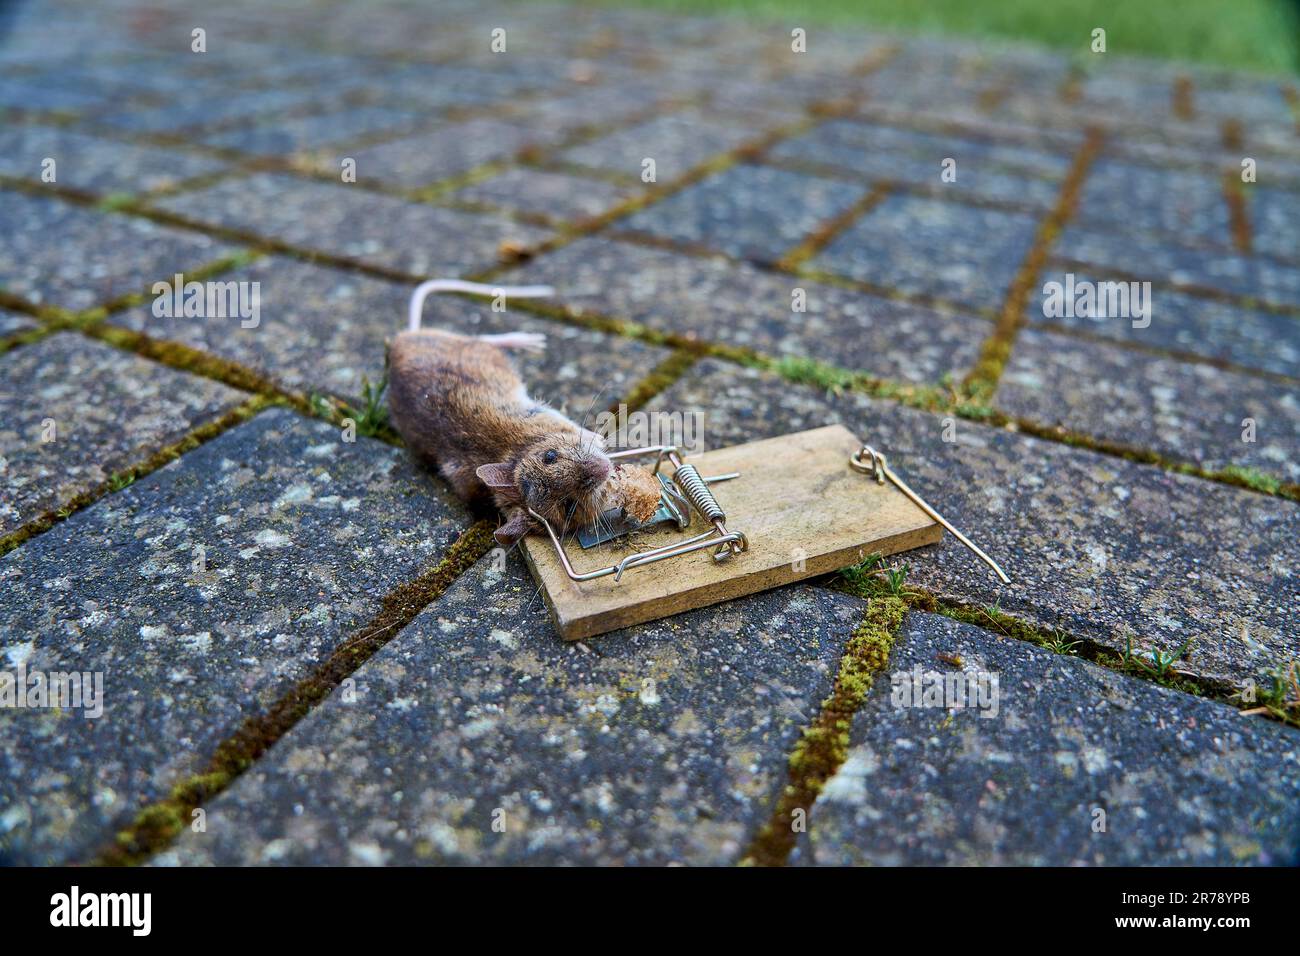 https://c8.alamy.com/comp/2R78YPB/close-up-of-small-bank-vole-mouse-dead-in-an-old-wooden-snap-trap-know-to-often-carry-and-transmit-the-hunta-virus-which-is-a-dangerous-disease-for-2R78YPB.jpg